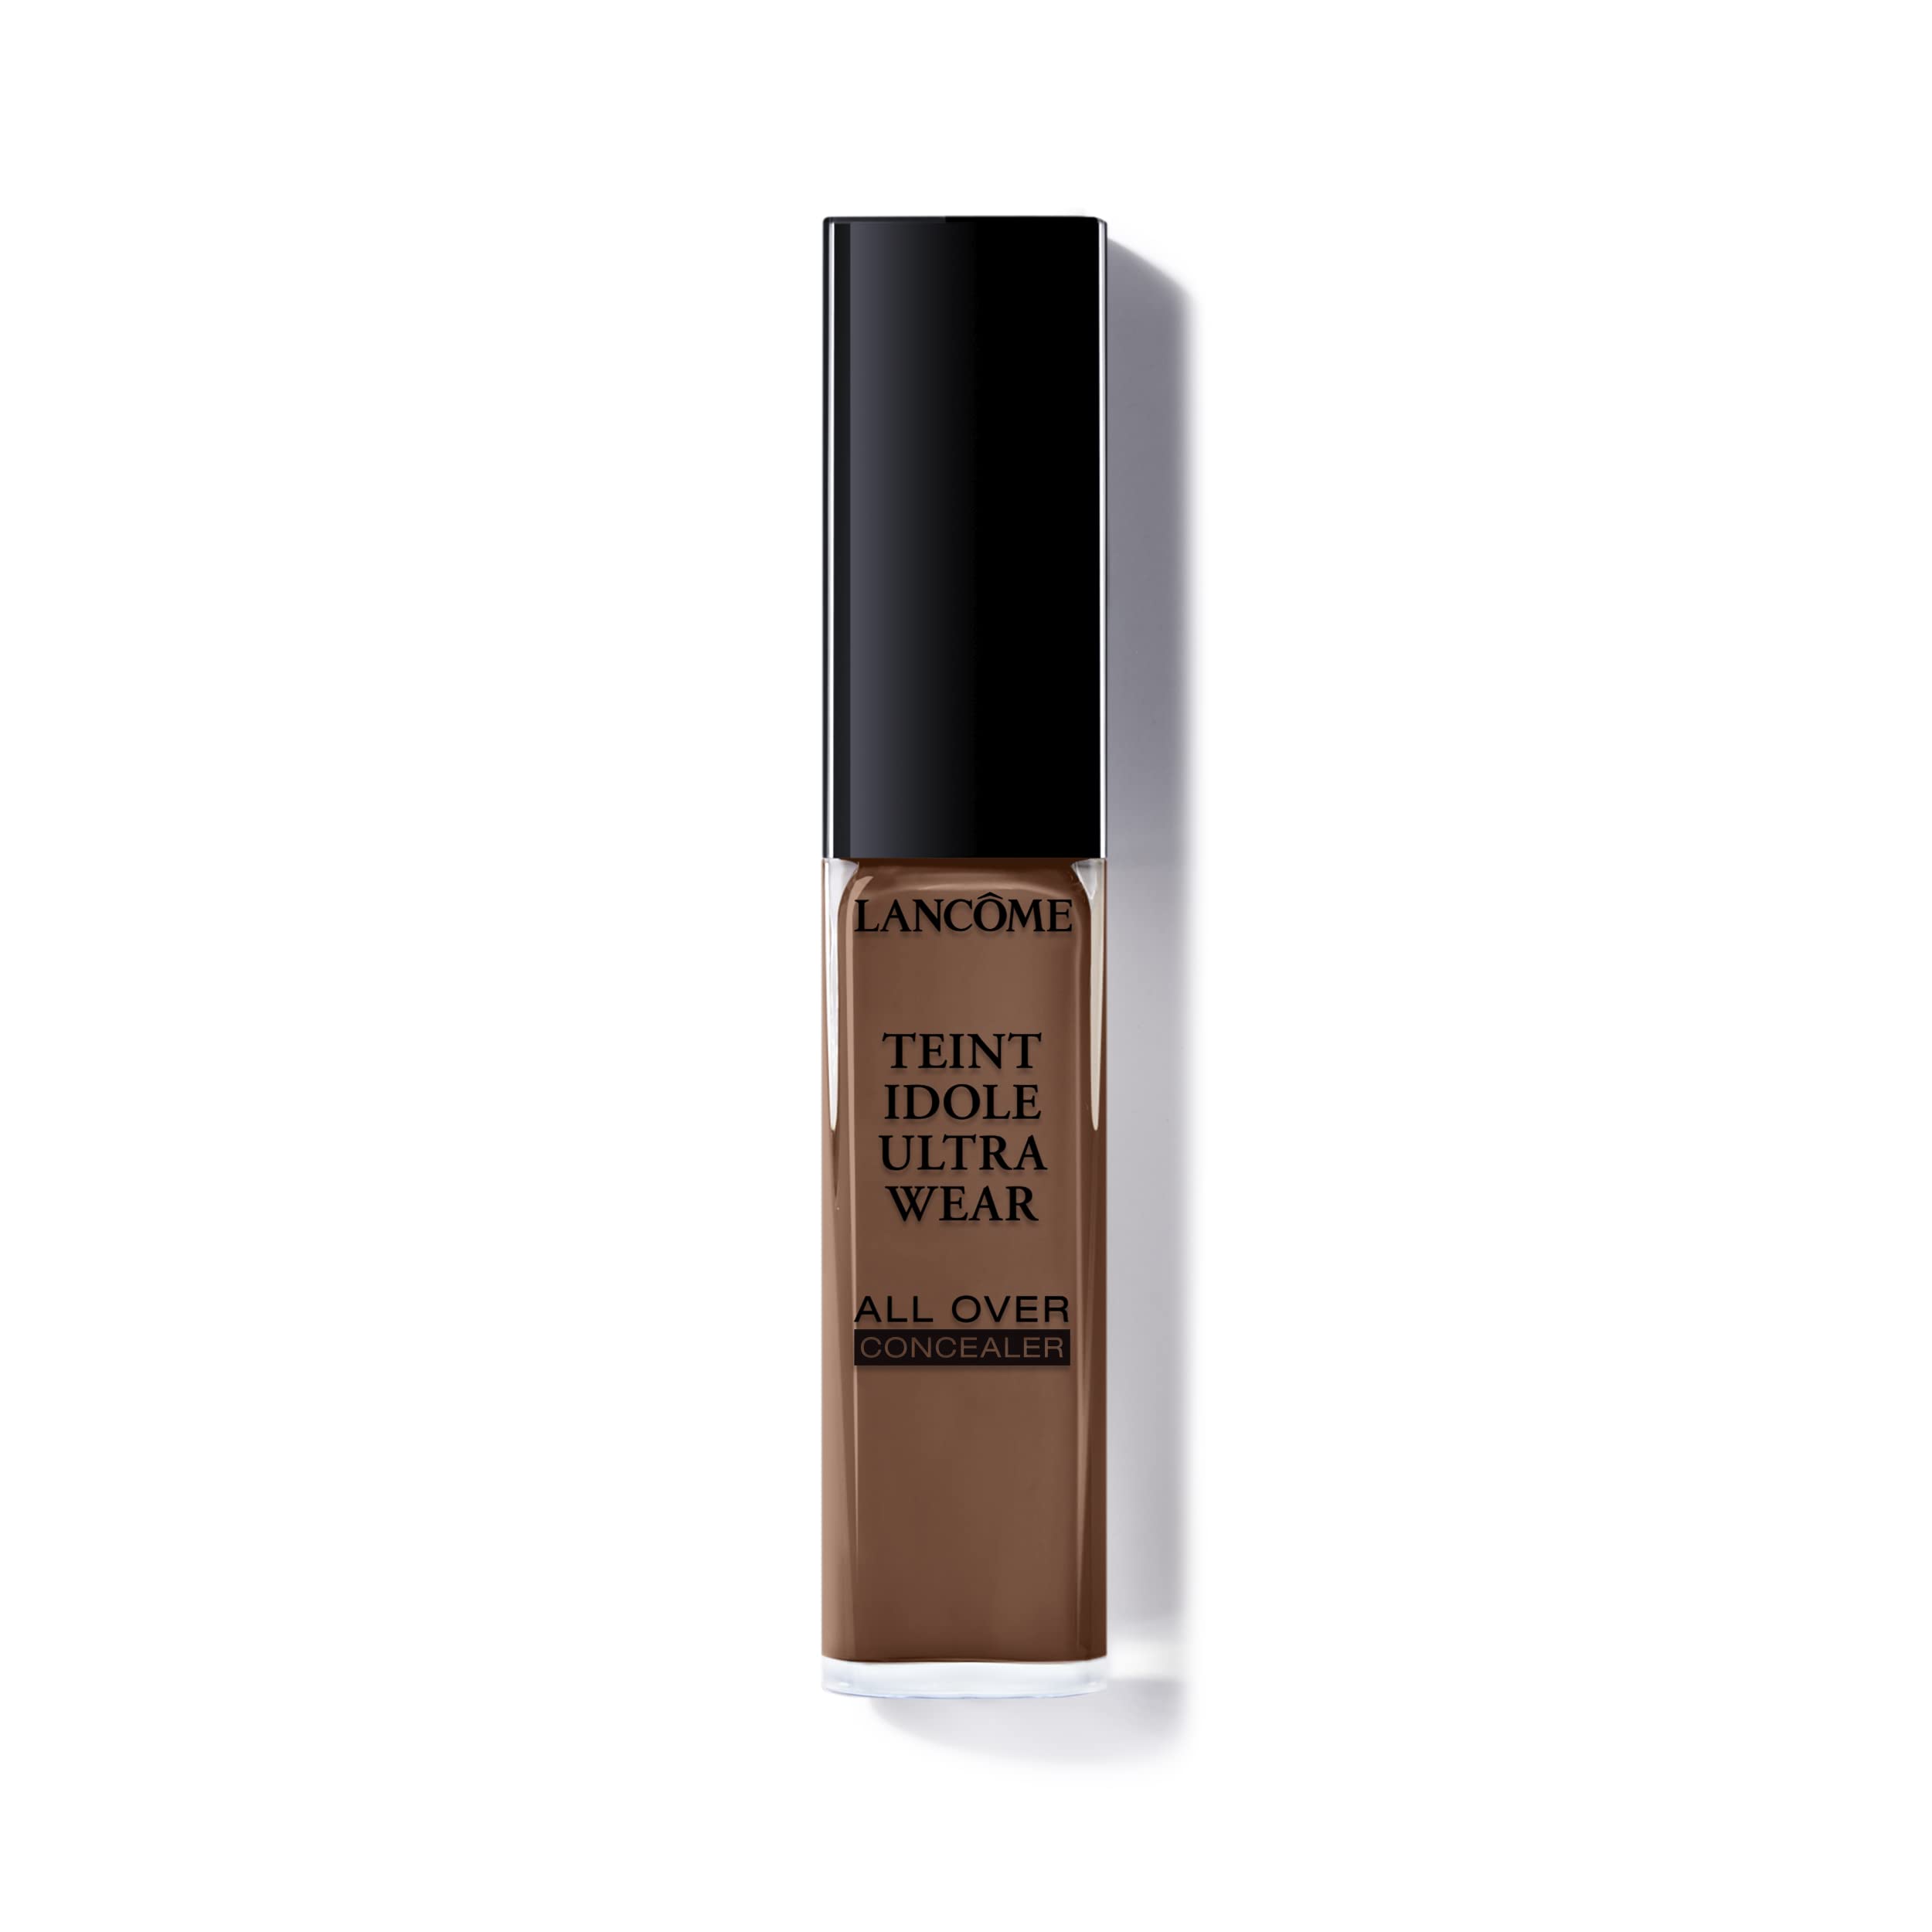 Lancme Lancame Teint Idole Ultra Wear All Over Full Coverage Concealer - Natural Matte Finish Lightweight Under Eye Concealer - Up To 2